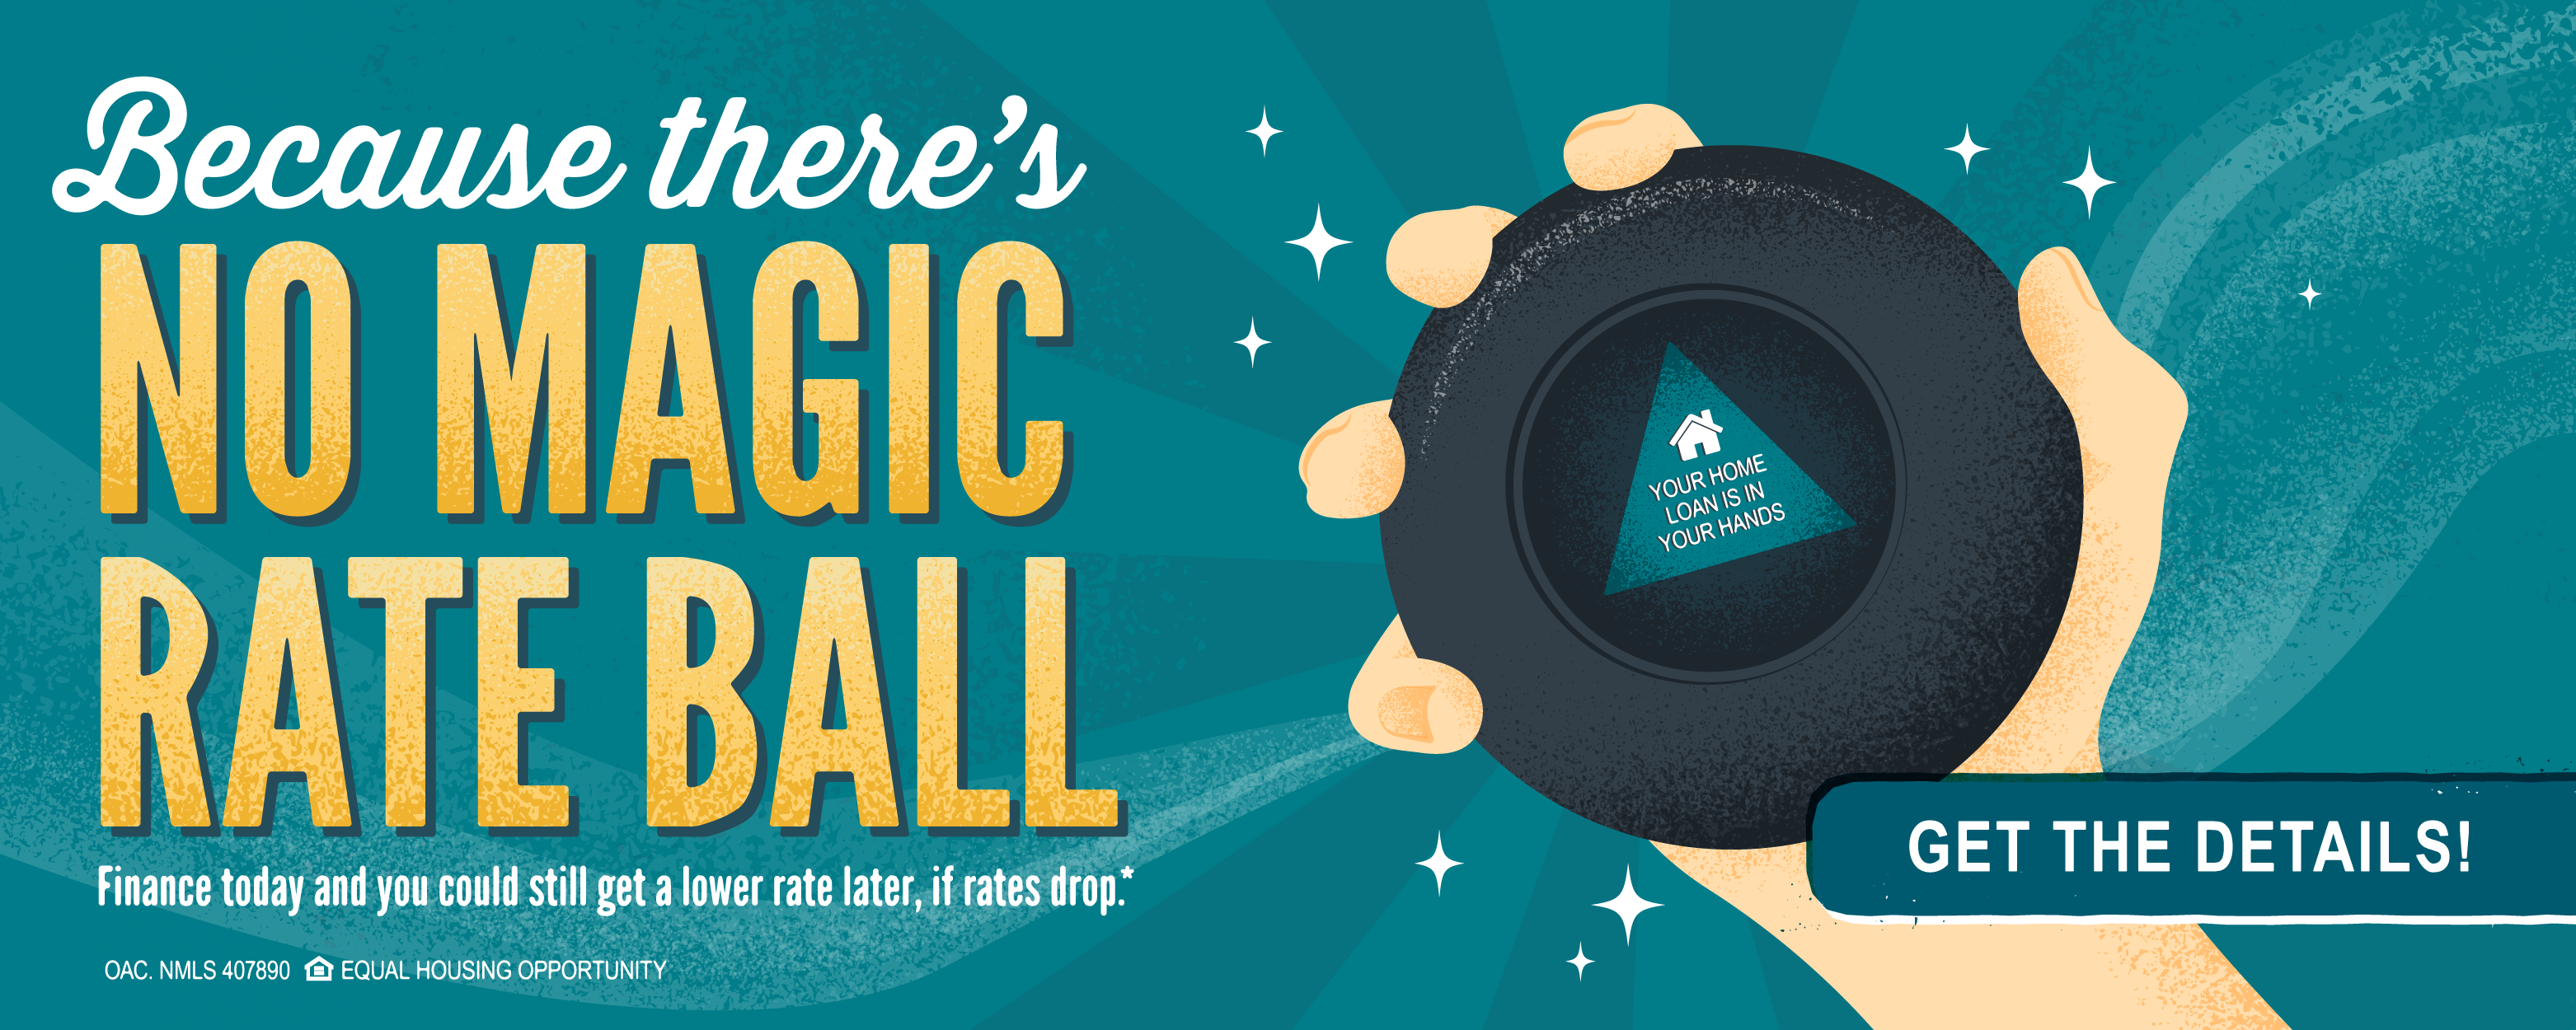 Because there's no magic rate ball... finance today and you could get a lower rate later, if rates drop!* Click to learn more. *OAC. Terms and conditions may apply.